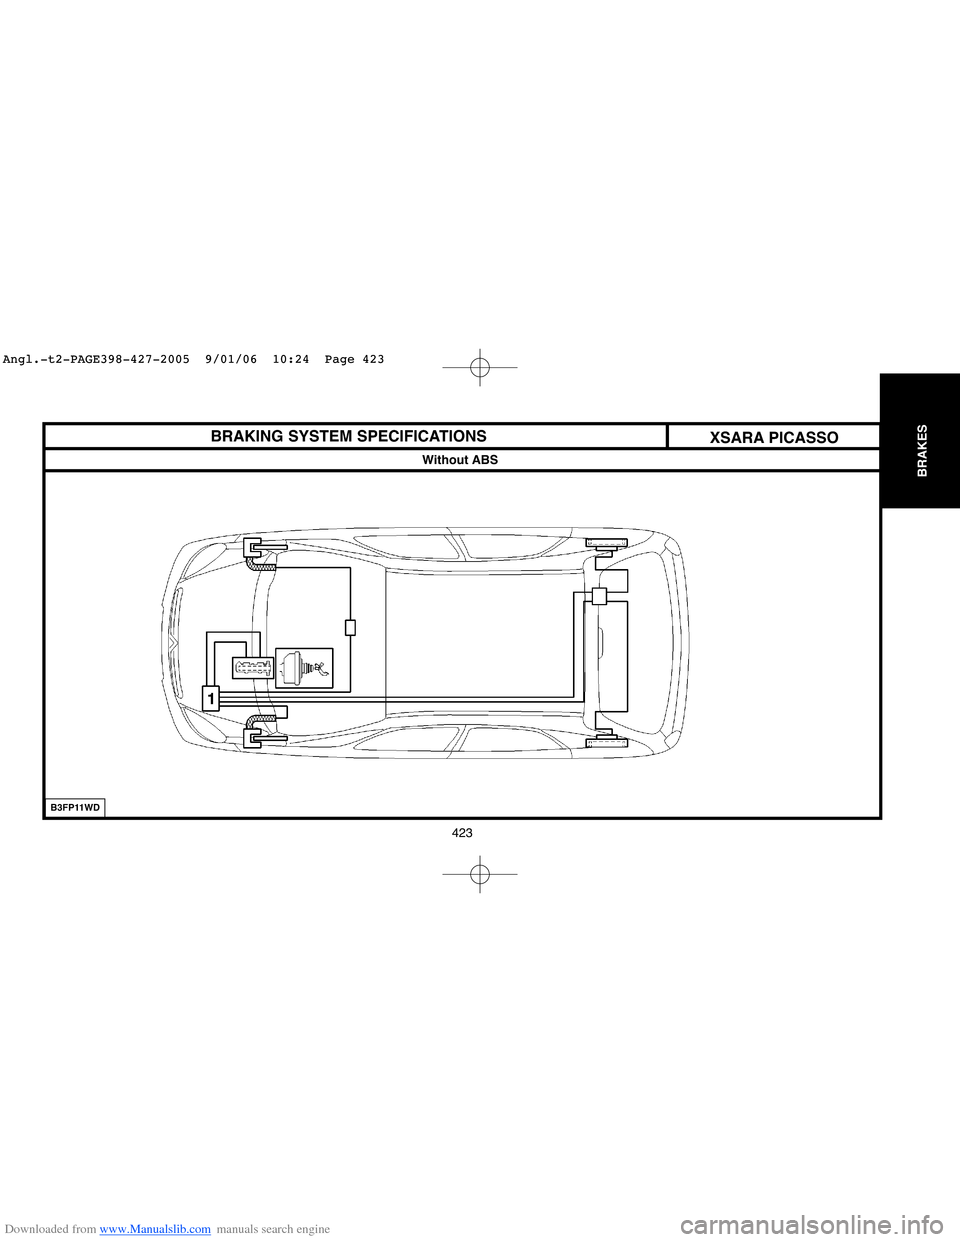 Citroen C4 2005 2.G Workshop Manual Downloaded from www.Manualslib.com manuals search engine 423
BRAKES
B3FP11WD
BRAKING SYSTEM SPECIFICATIONS
Without ABS
XSARA PICASSO
Angl.-t2-PAGE398-427-2005  9/01/06  10:24  Page 423  